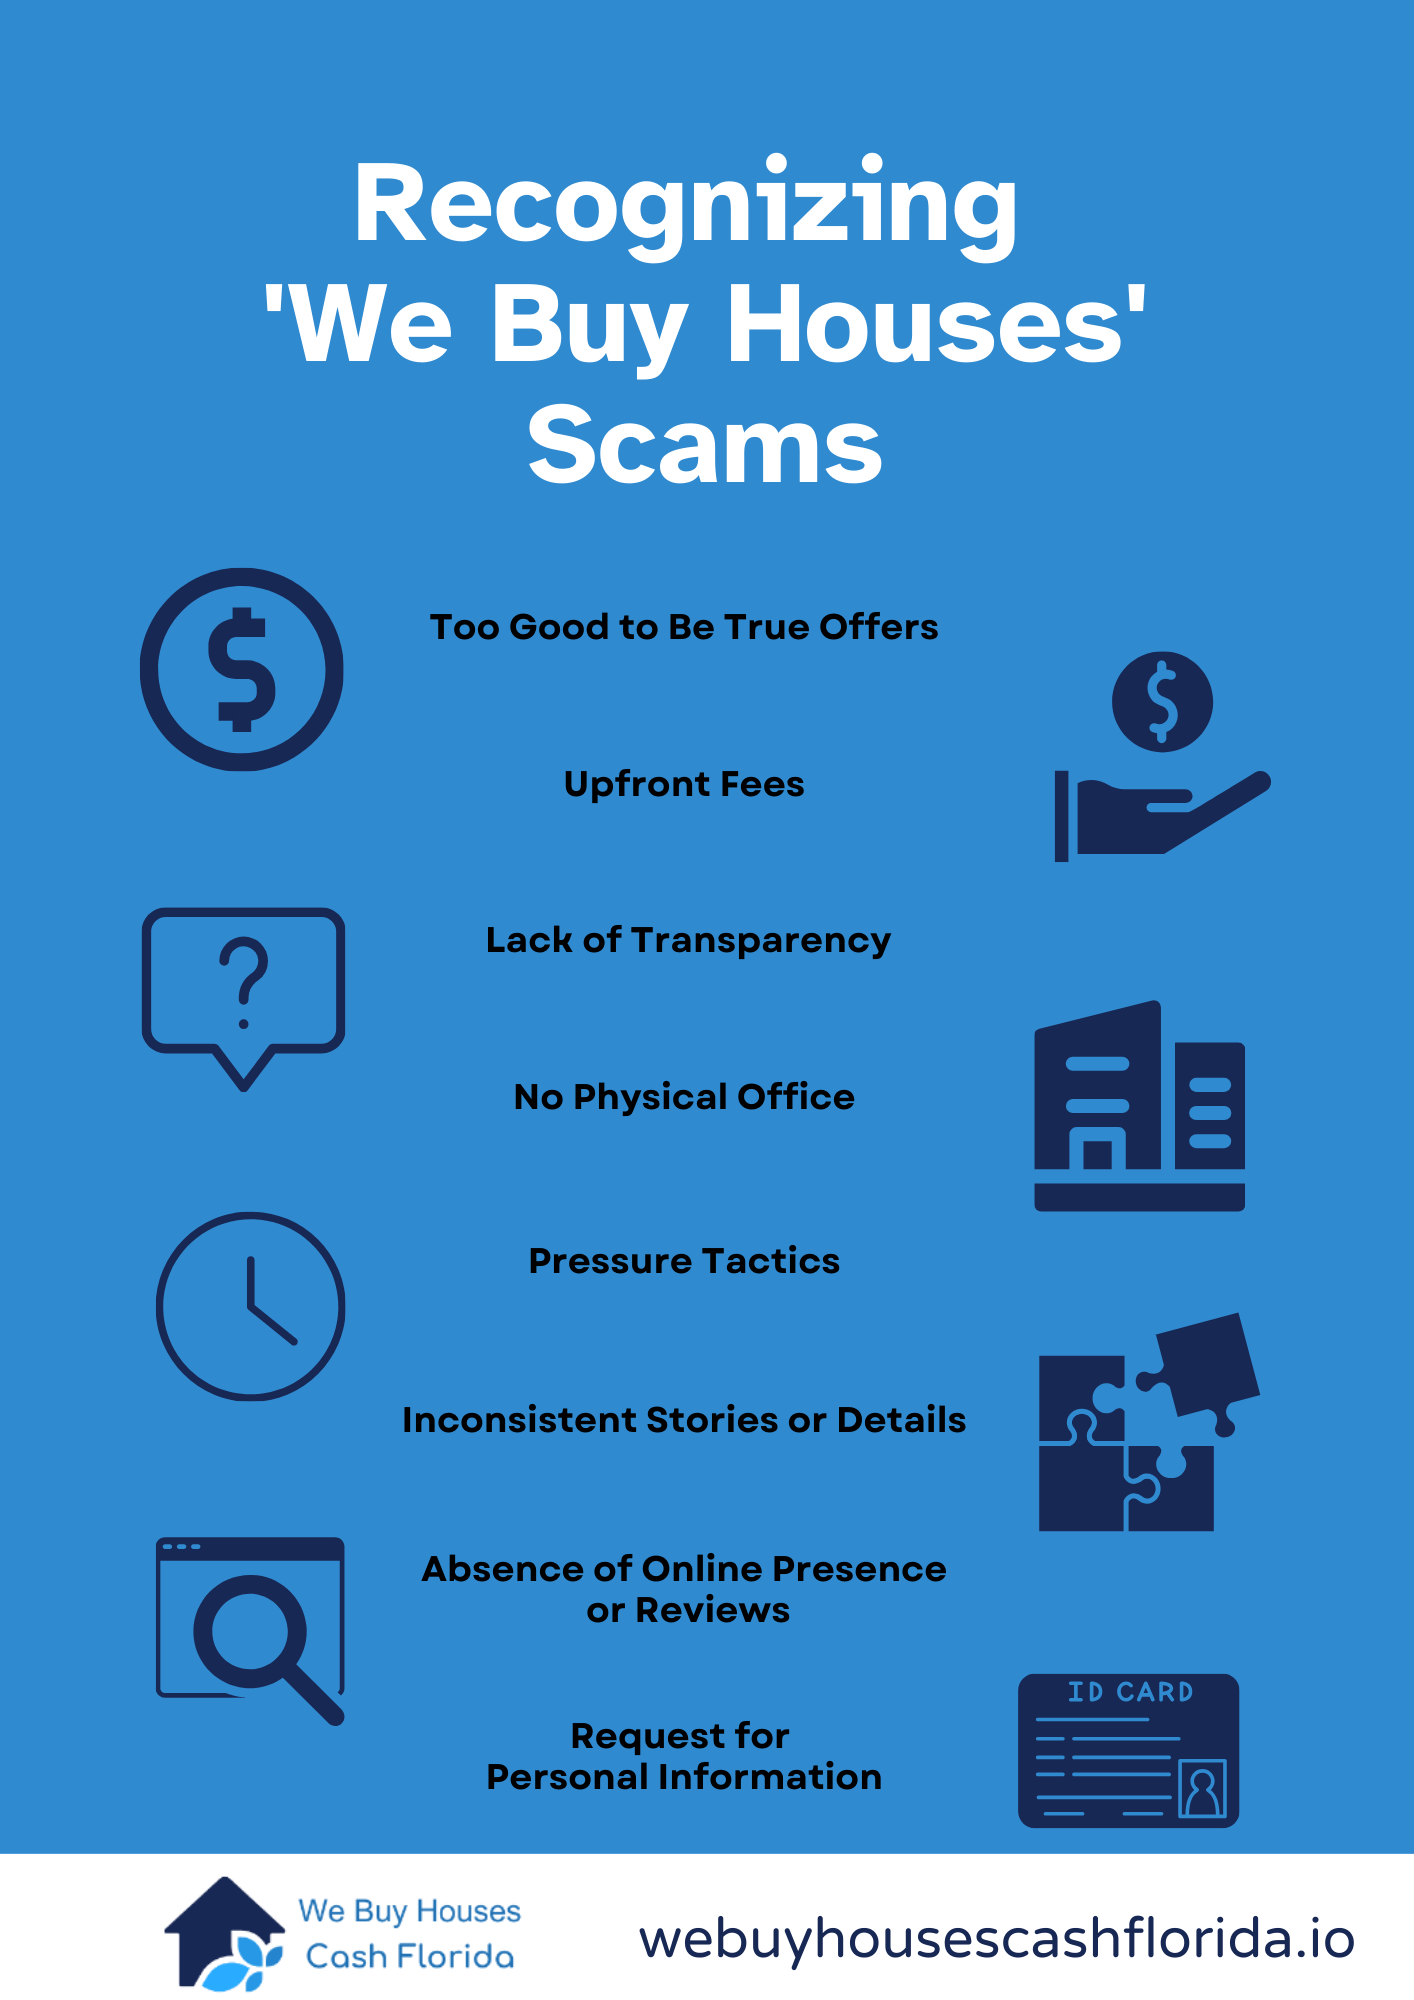 infographic to help recognize we buy houses scams